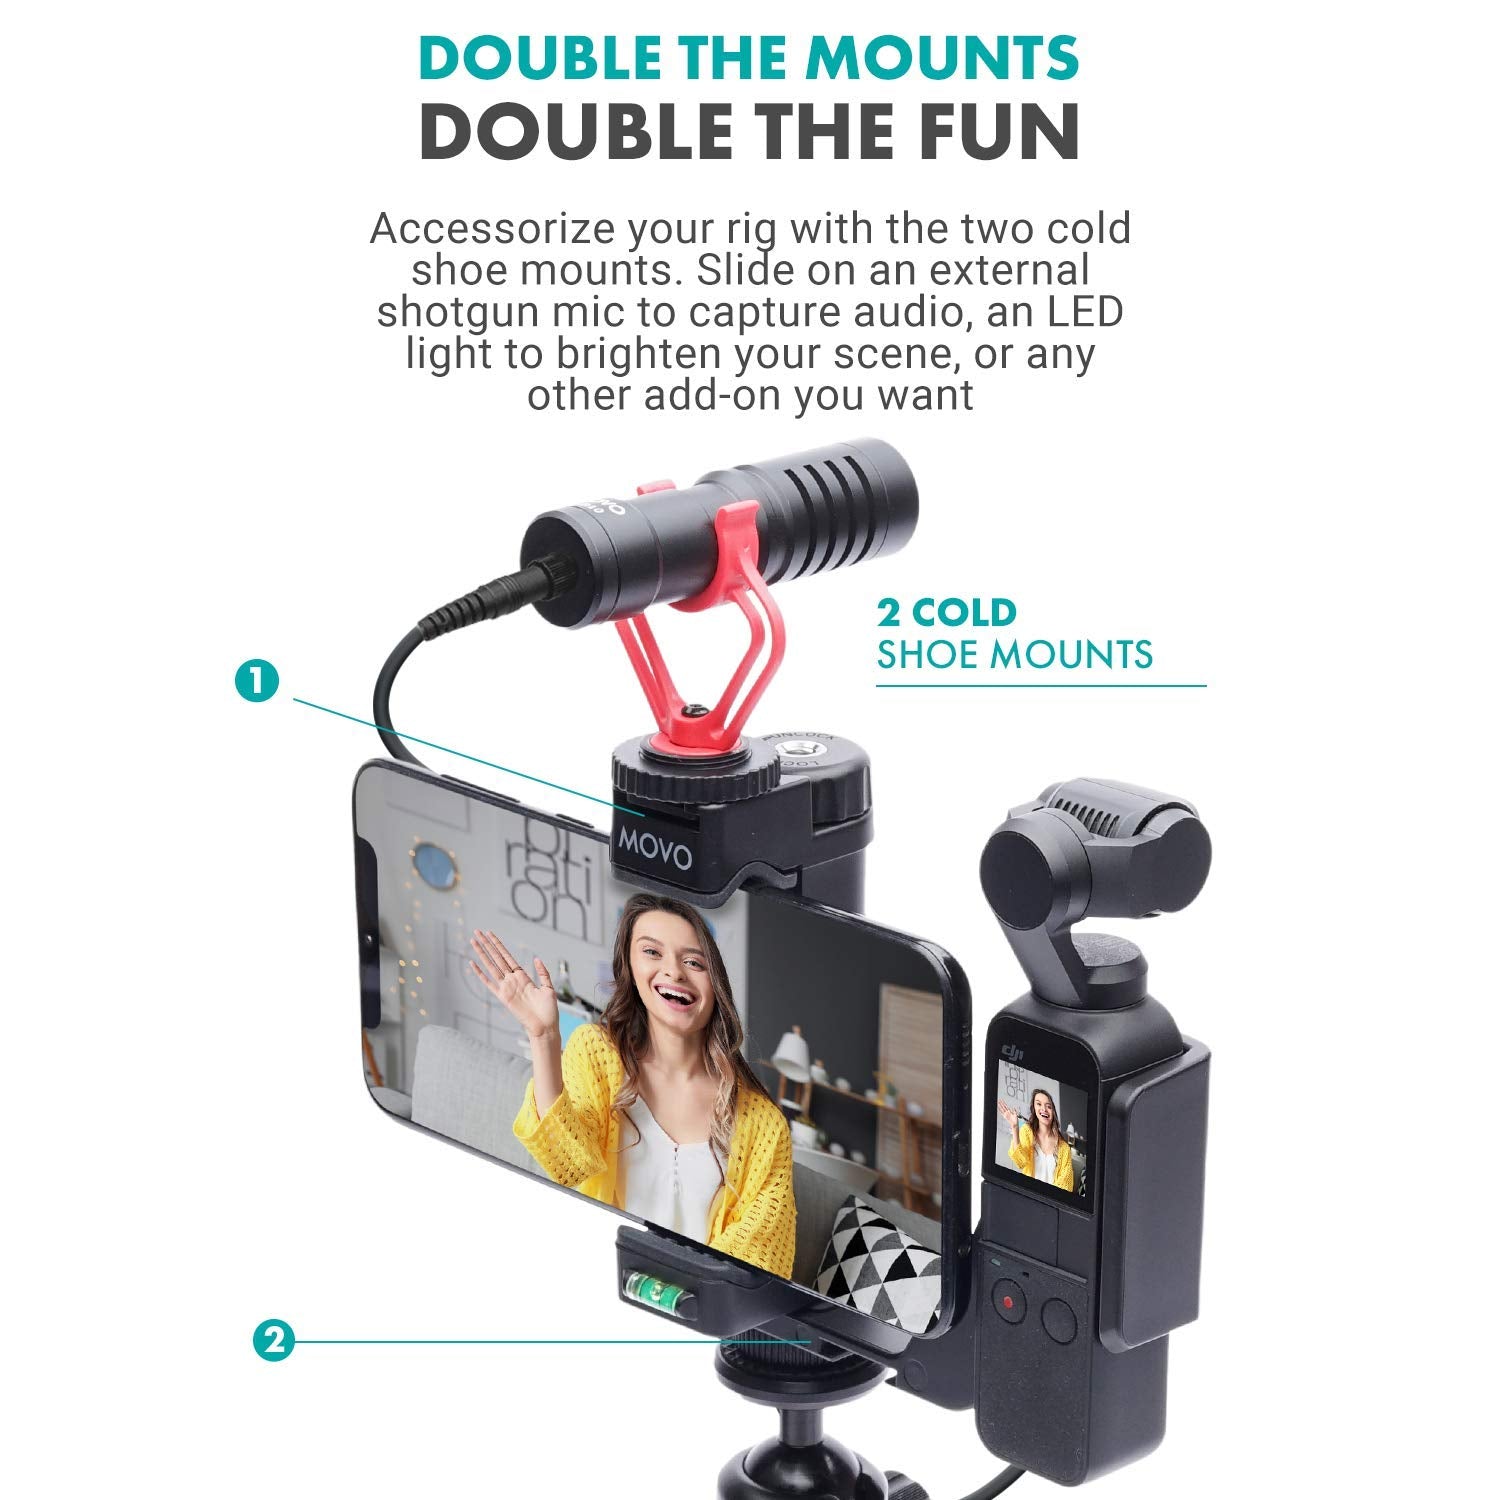 Movo Video Rig Compatible with The DJI OSMO Pocket 1, 2 - Includes Universal Smartphone Mount, Grip Handle, and 2 Cold Shoes for Mounting Microphone, Light - OSMO Pocket Microphone and Video Rig  - Like New